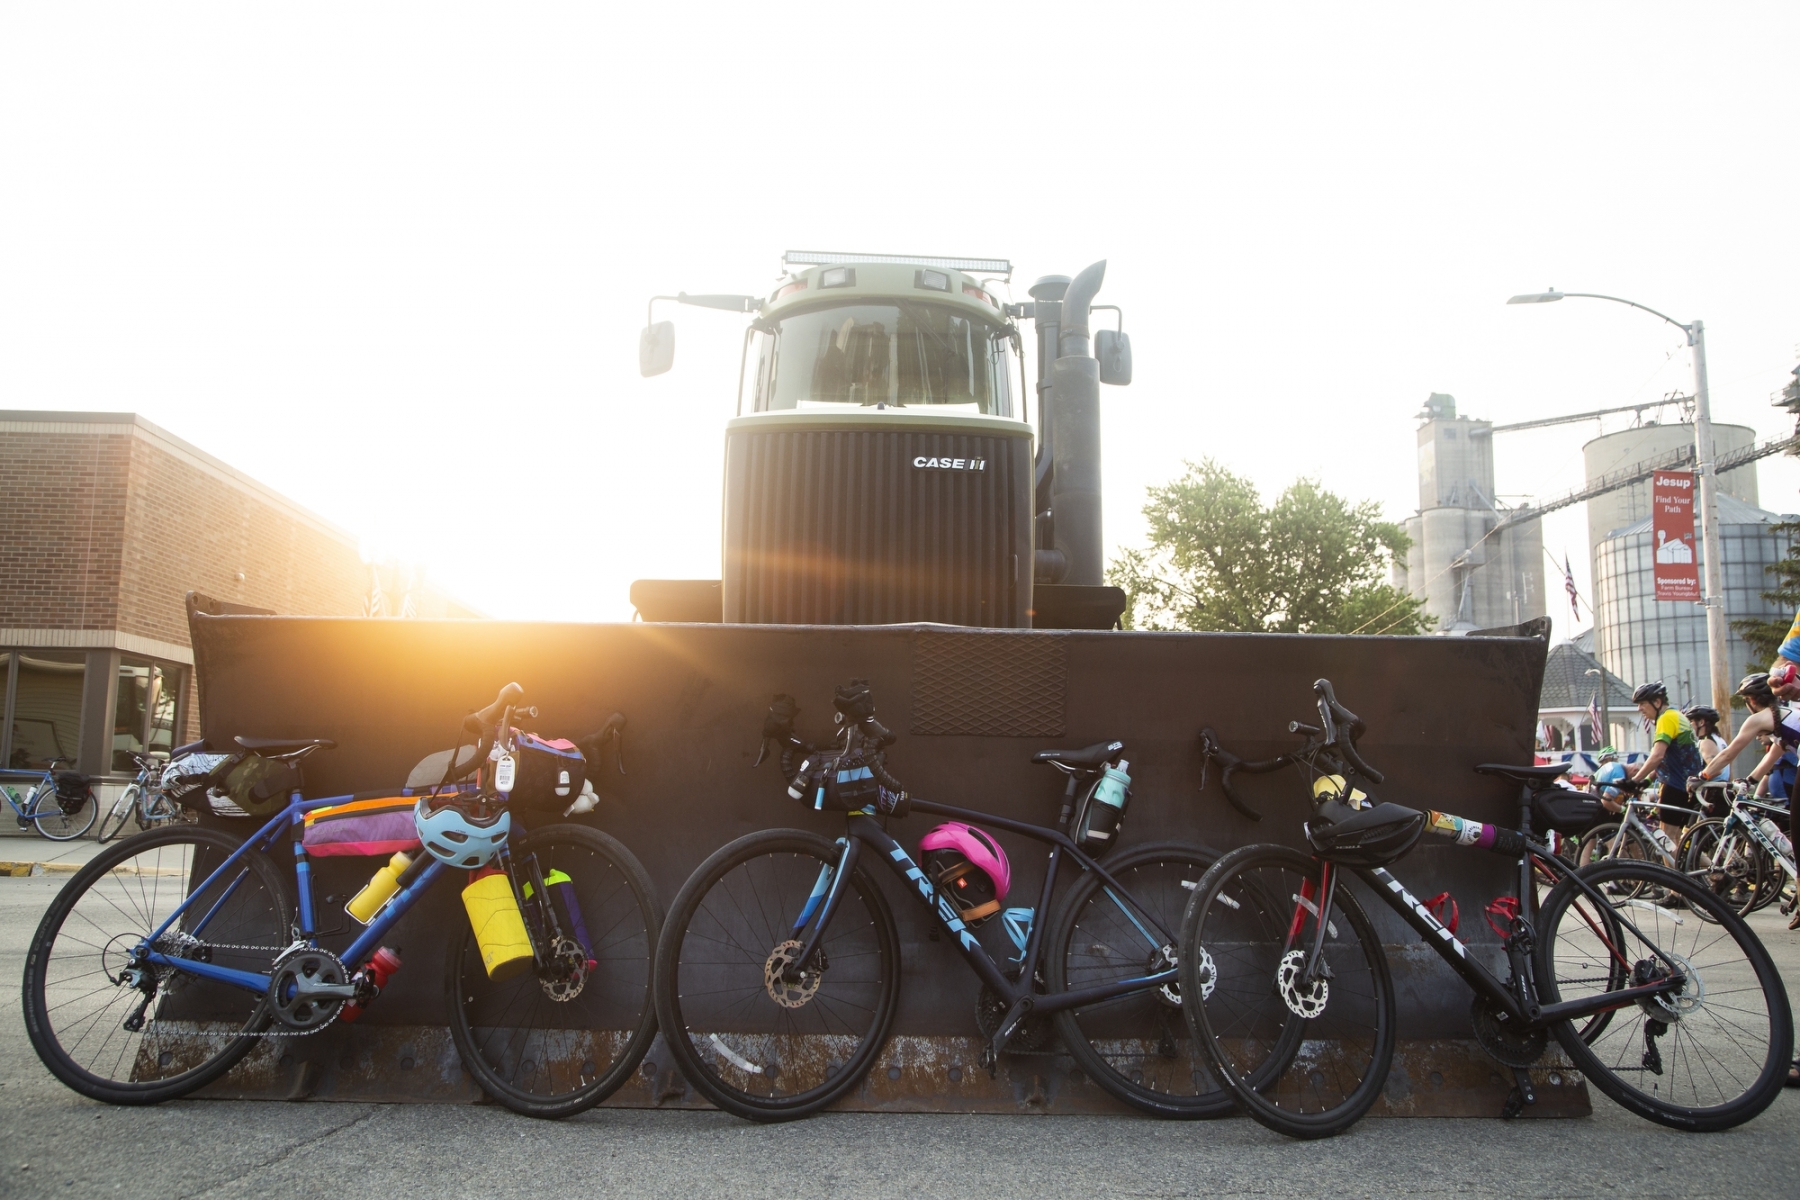 A tractor is used as a bike rack as RAGBRAI riders get breakfast in Jesup on Thursday, July 29, 2021.